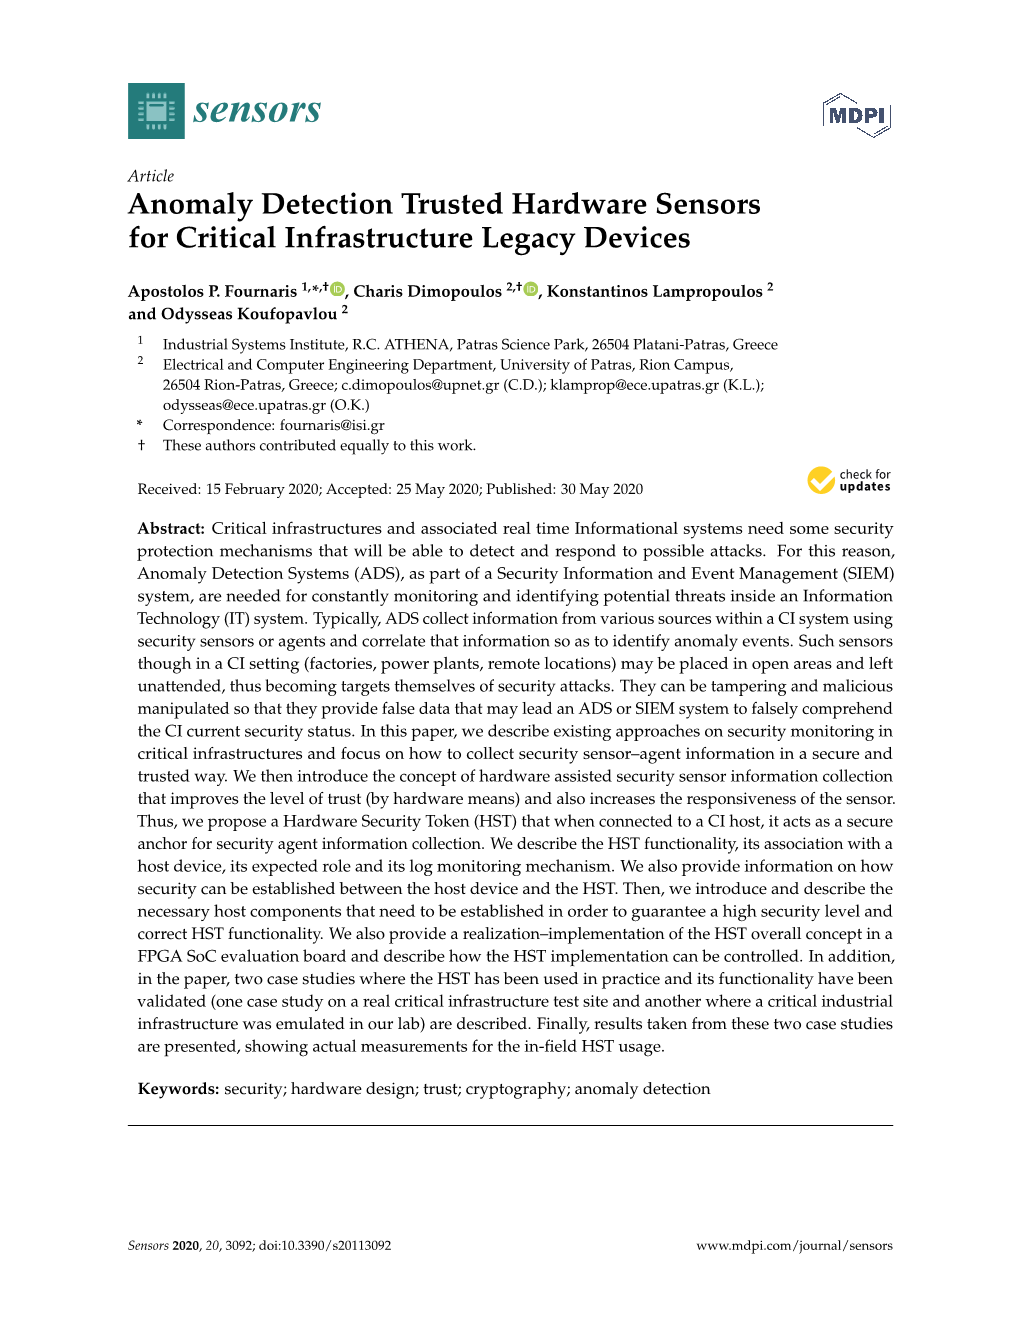 Anomaly Detection Trusted Hardware Sensors for Critical Infrastructure Legacy Devices